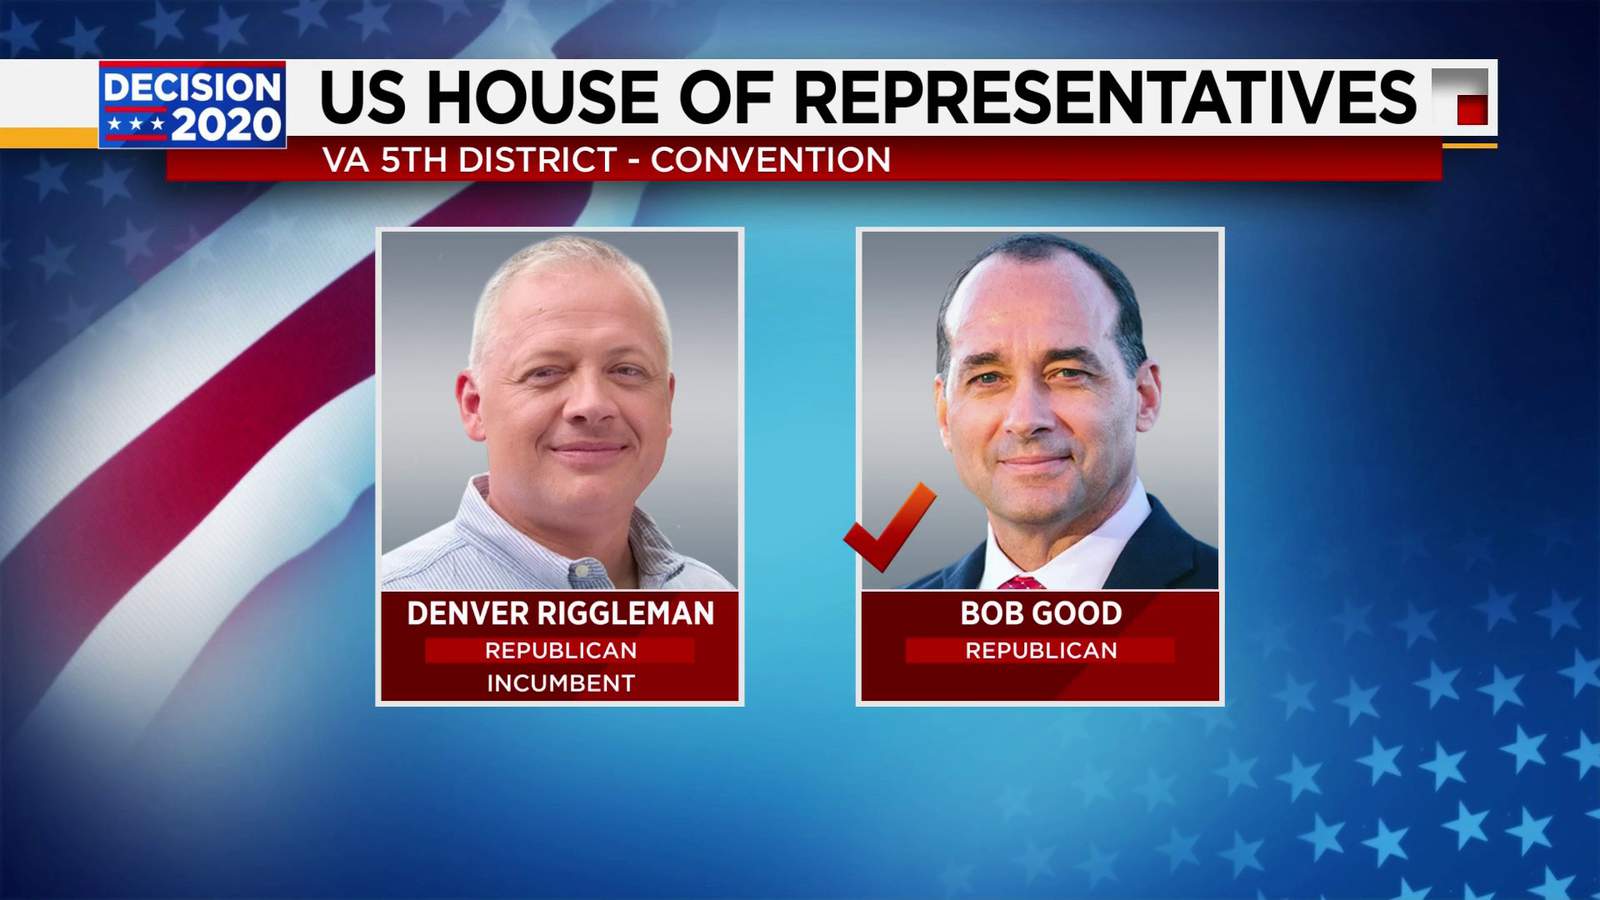 Bob Good wins GOP nomination for 5th District Congressional seat